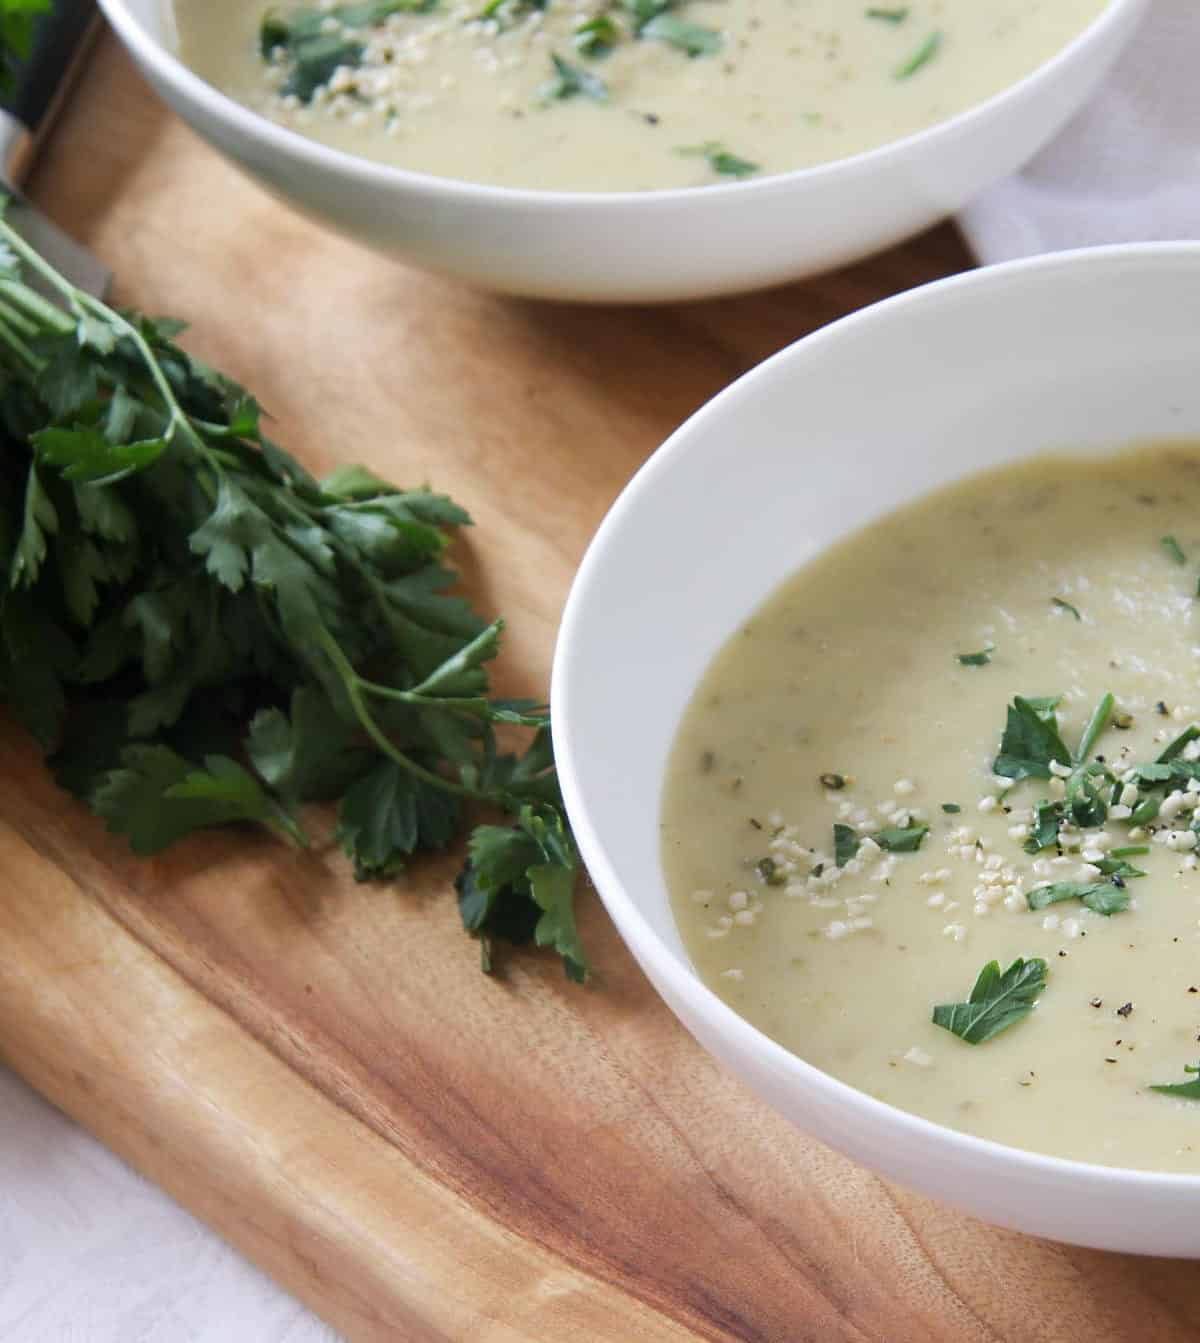  Cozy up with a comforting bowl of Cream of Potato, Leek, Zucchini and Chicken Soup today!